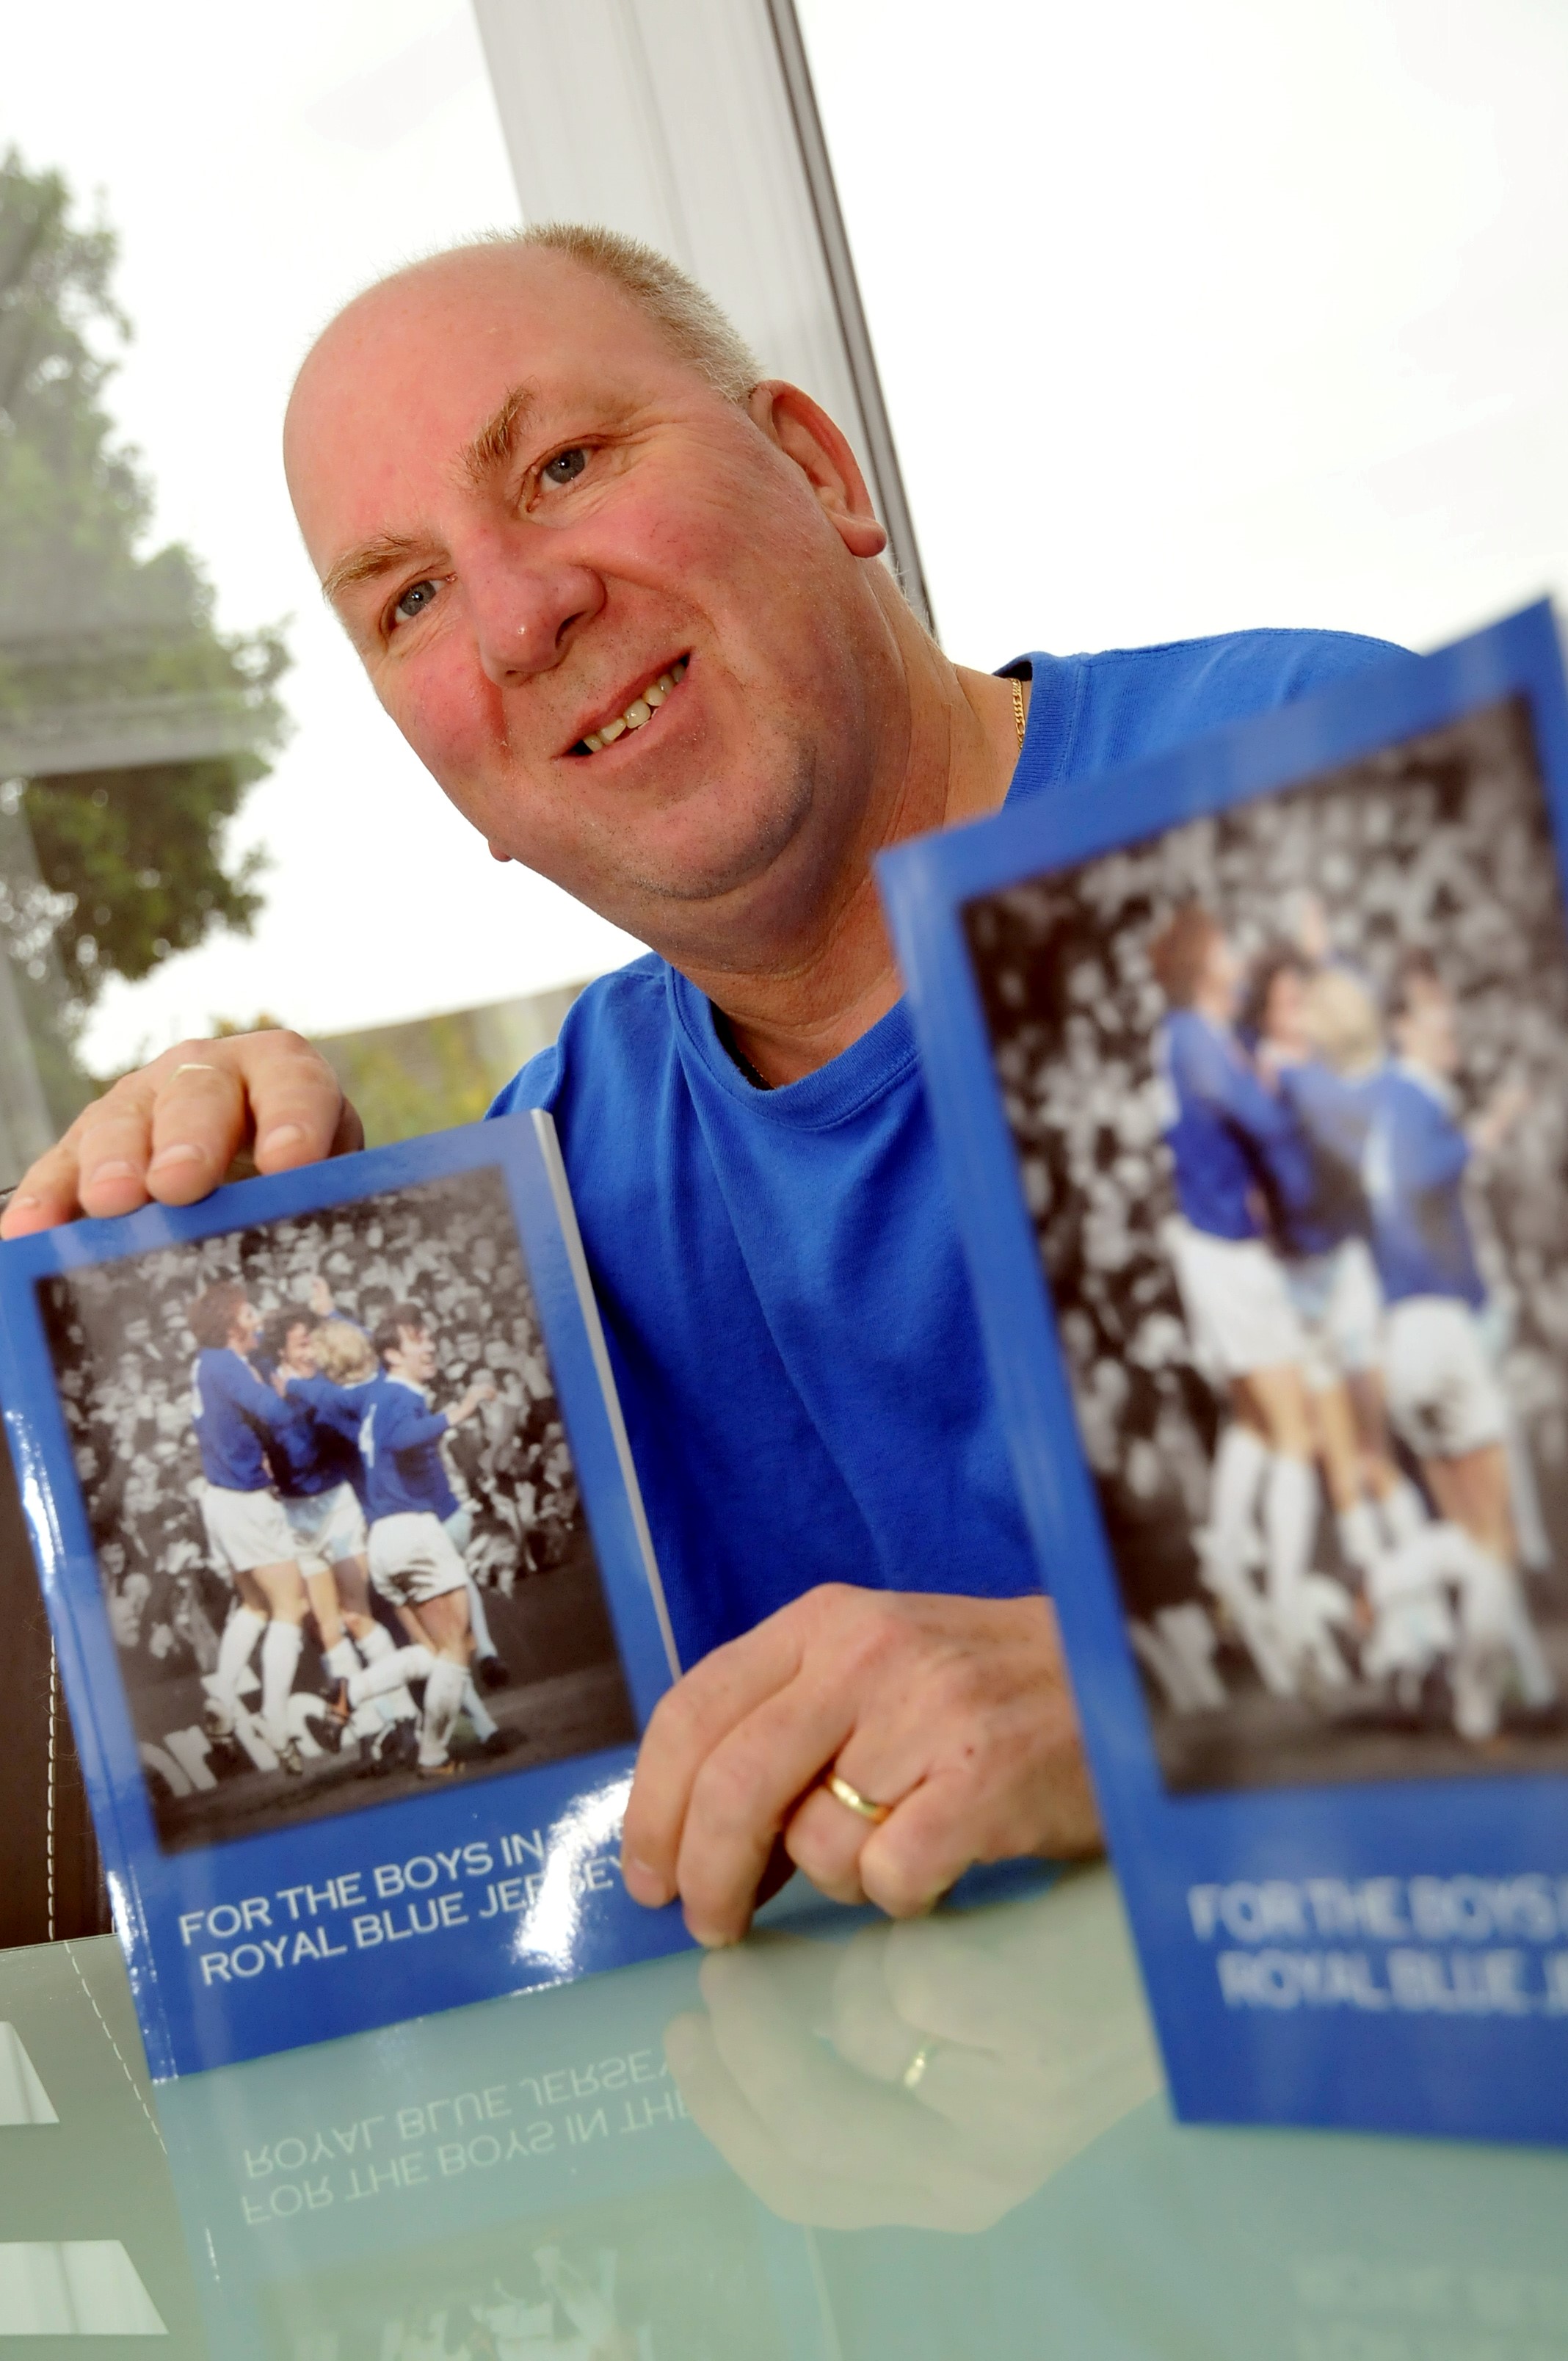 Everton fan from Burtonwood publishes book on sporting heroes